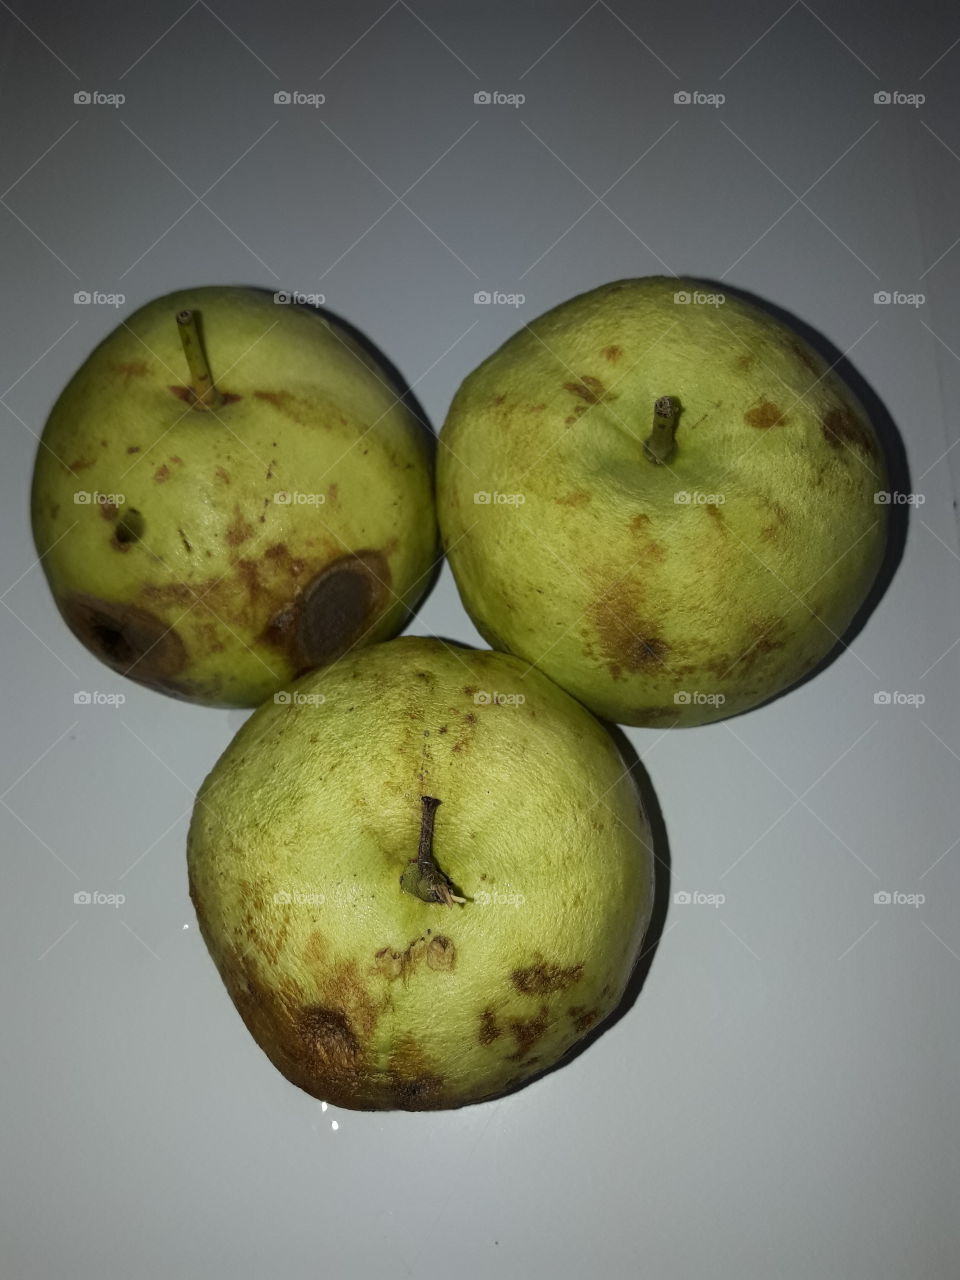 three guavas placed at the room temperature for several days until they are rotten.